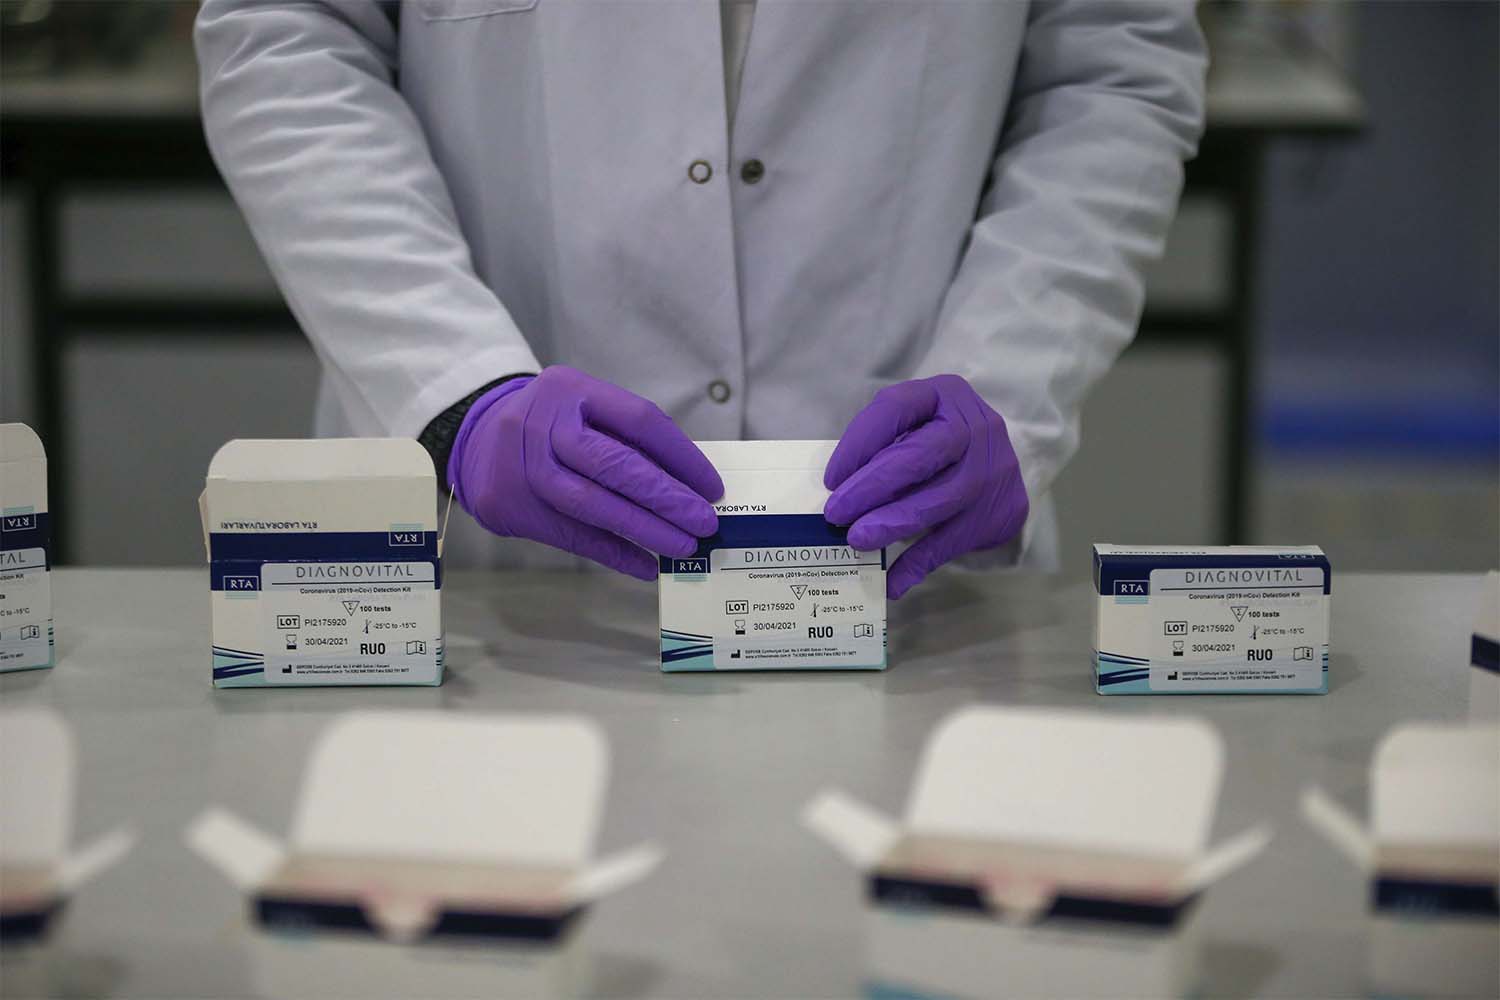 A research and development company worker works on the production of coronavirus testing kits in Gebze, northwestern Turkey